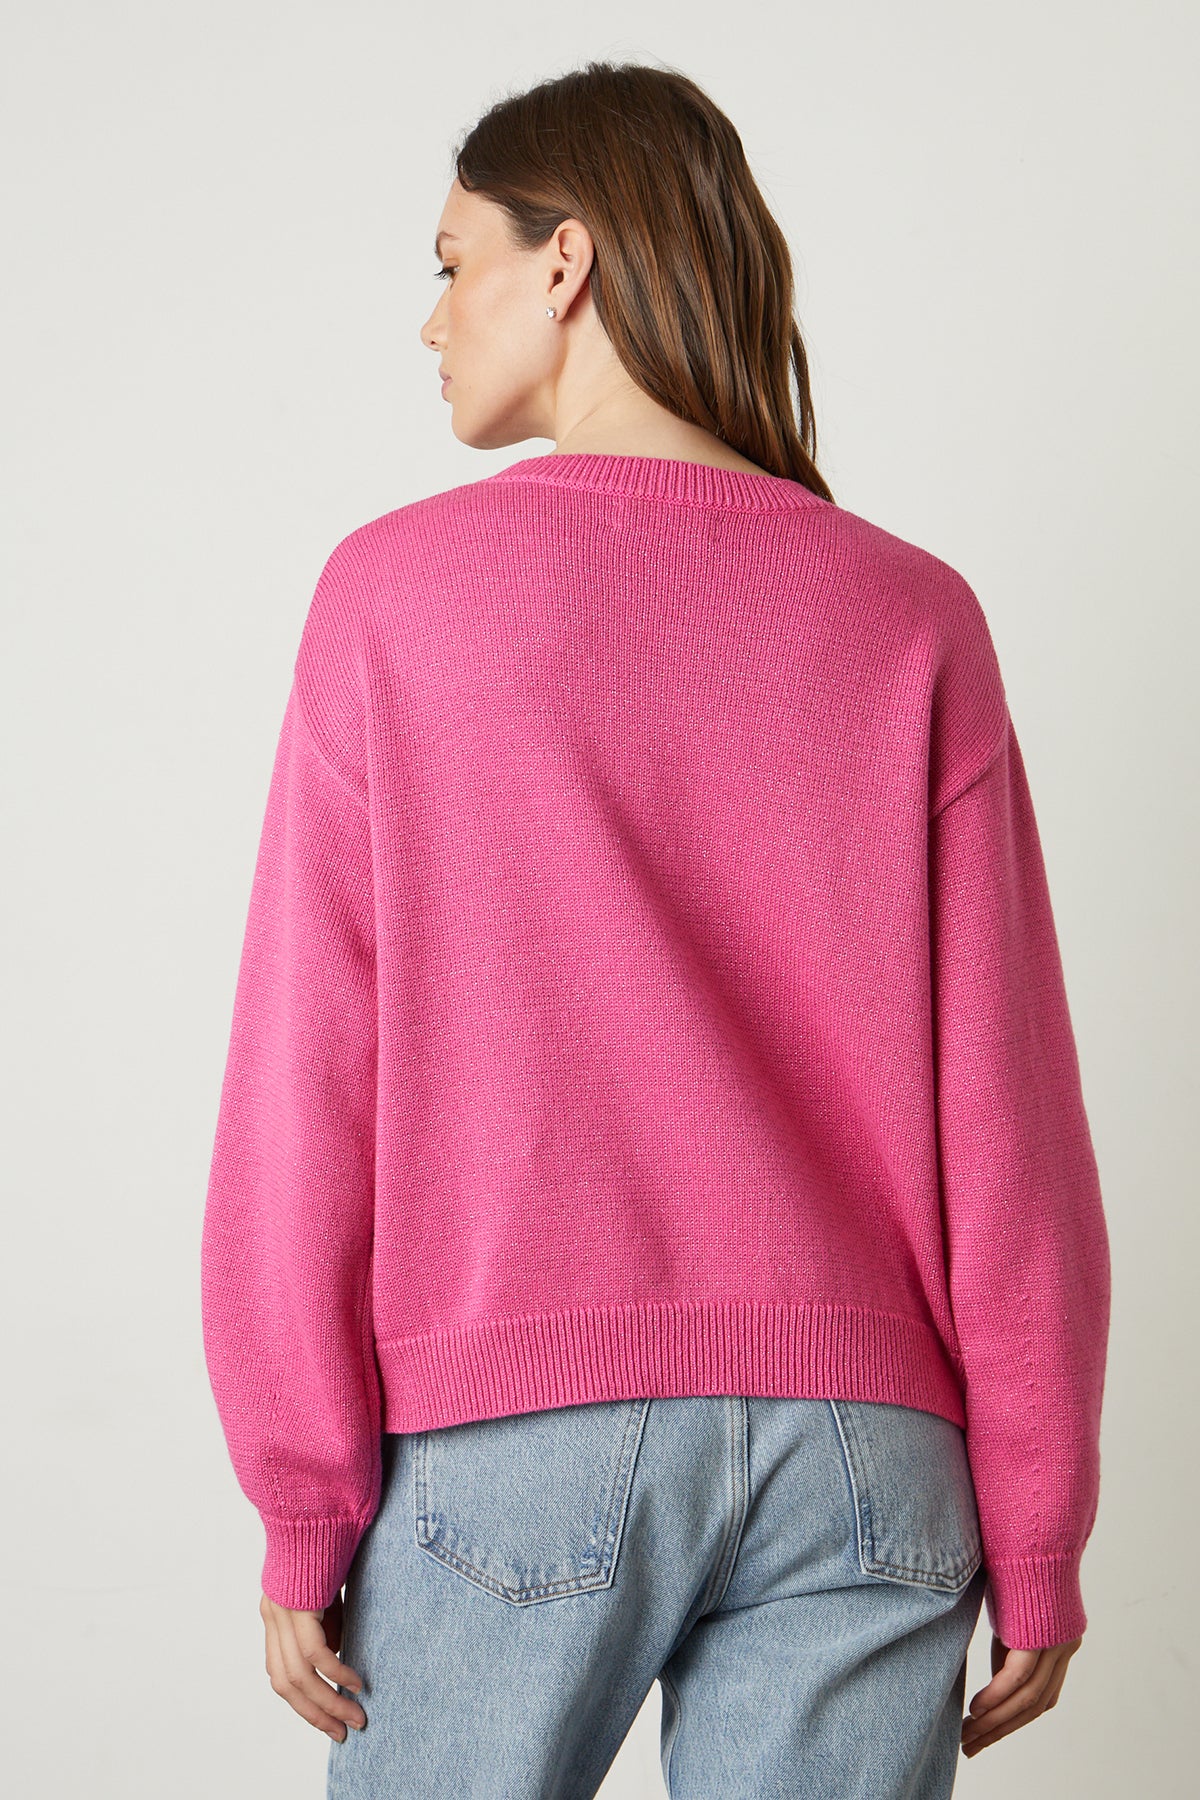 Hallie Crew Neck Sweater in bright candy pink with blue denim back-25751050059969